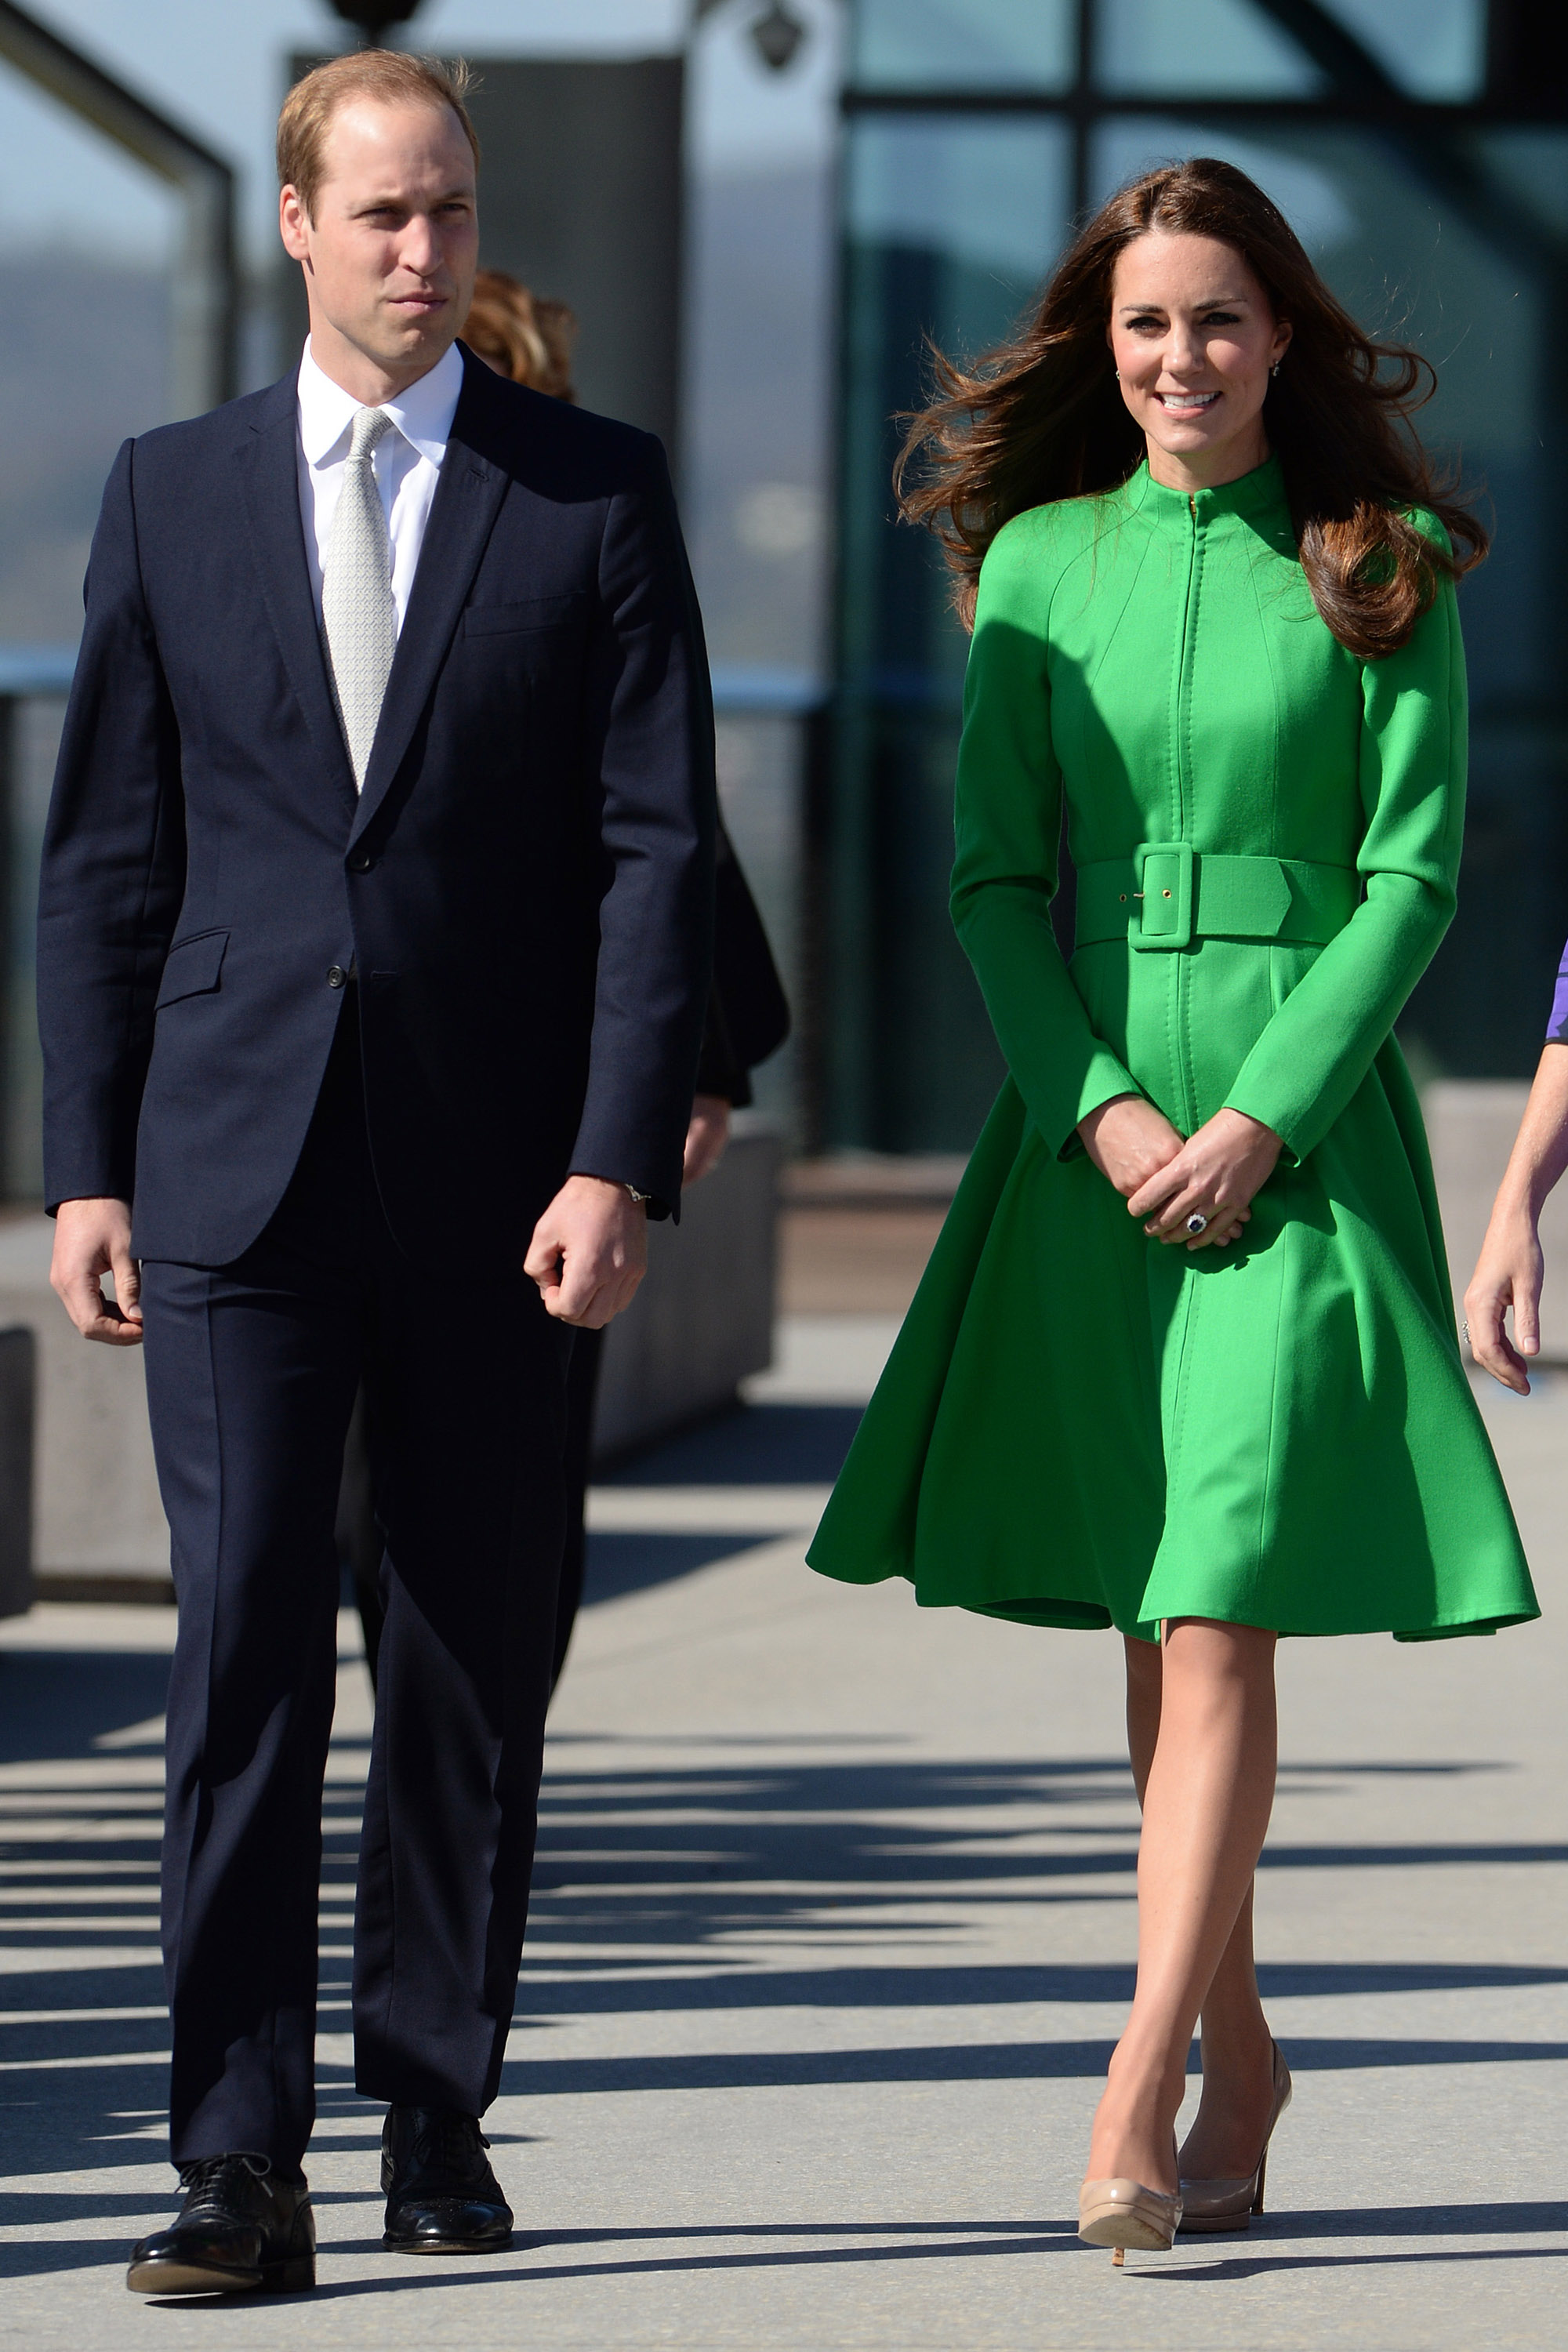 From left: The Duke and Duchess visit the National Portrait Gallery in Canberra April 24, 2014.